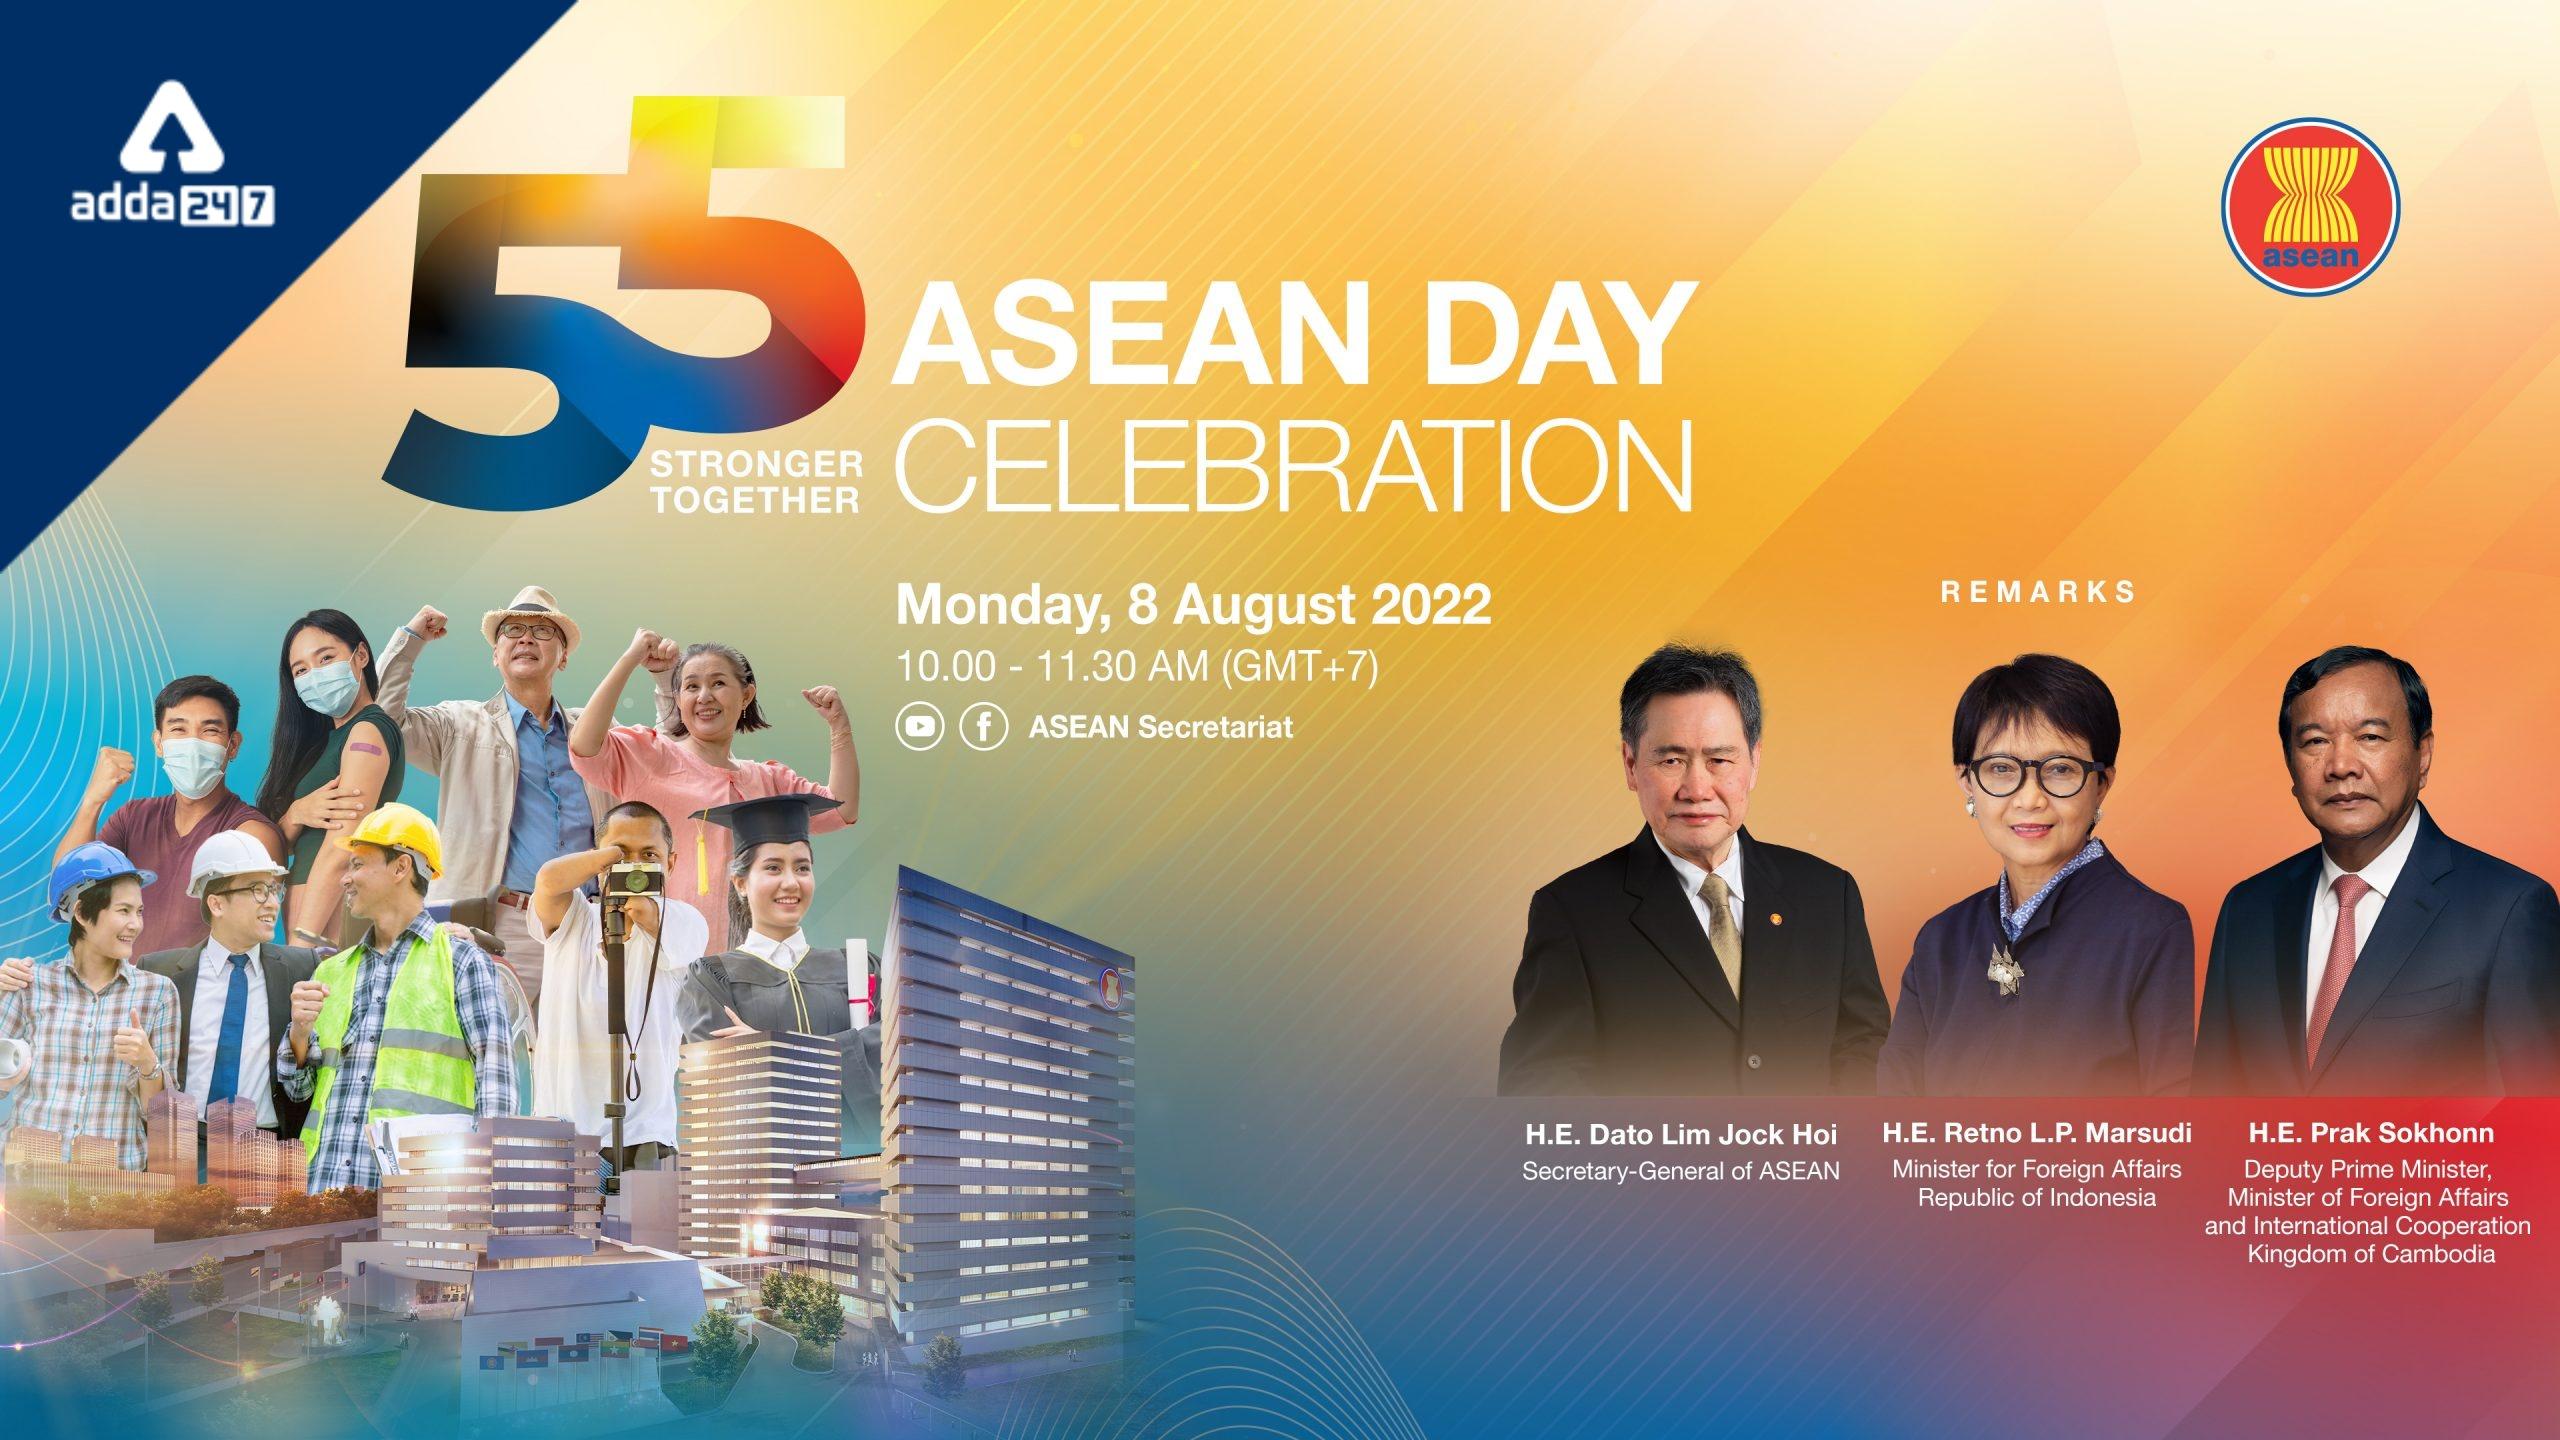 ASEAN Has Celebrated Its 55th Anniversary In 2022._30.1